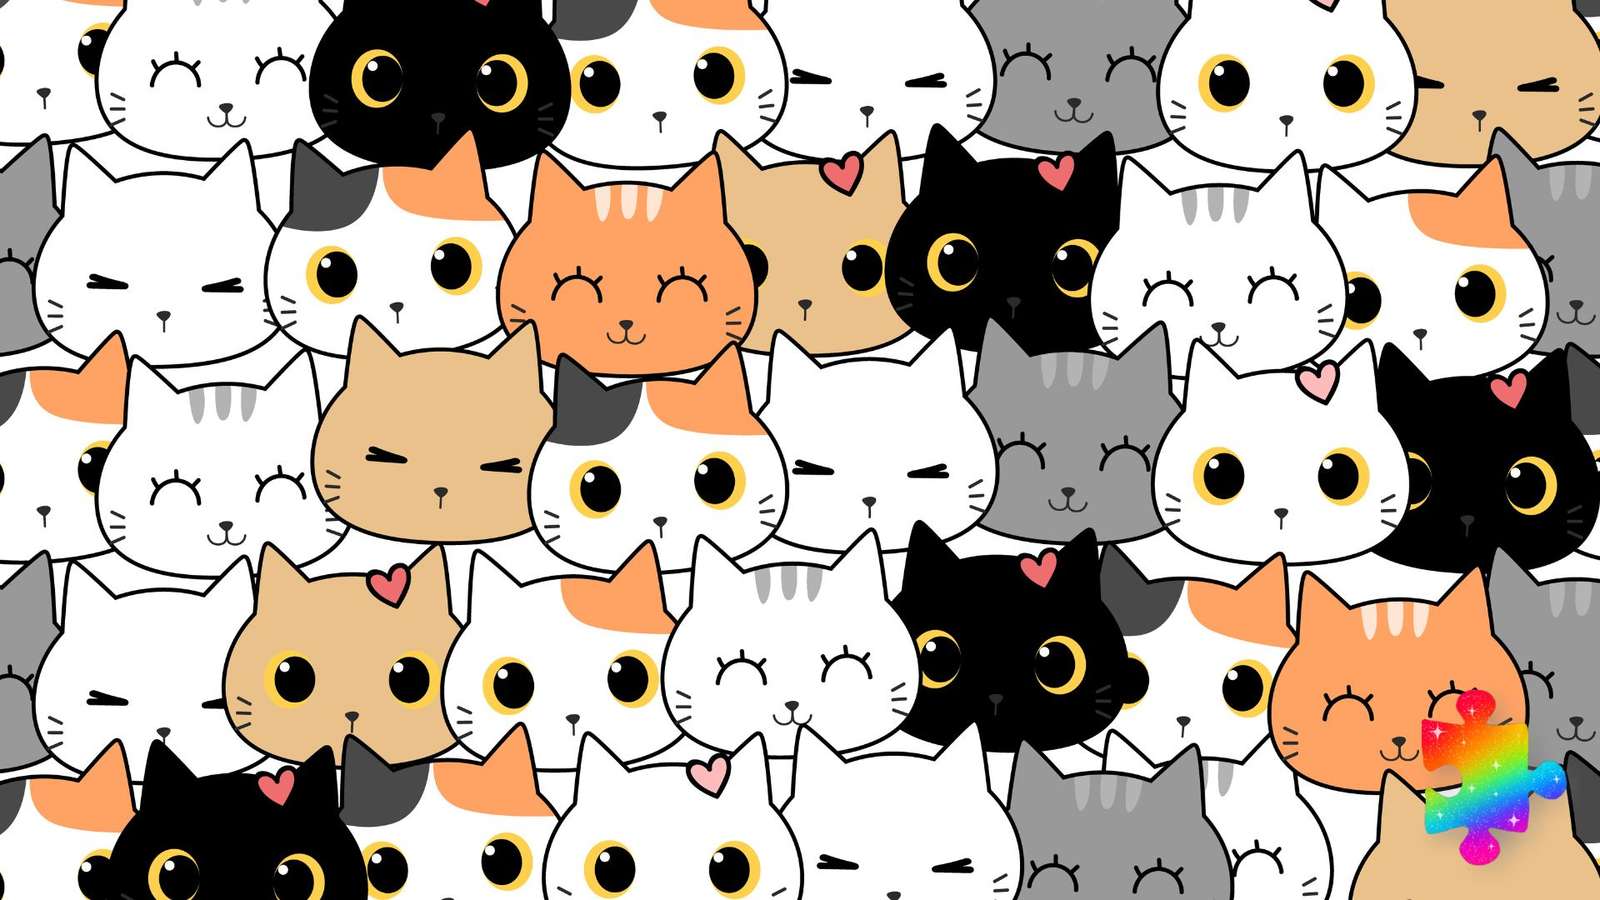 So Many Cats! puzzle online